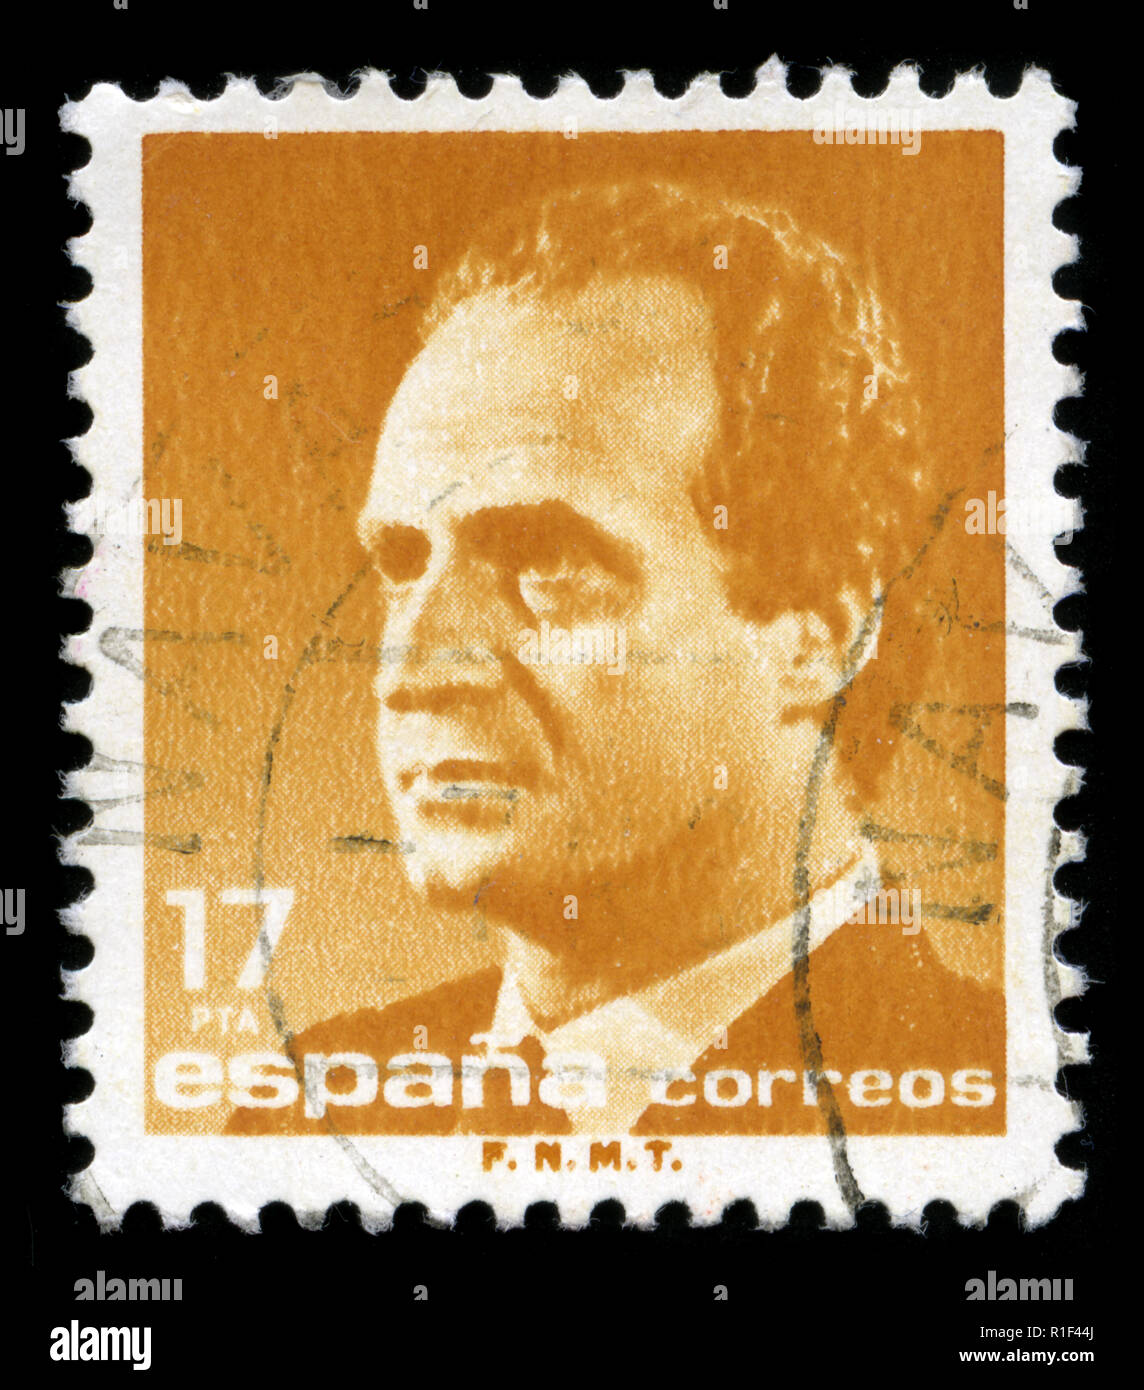 Postage stamps from Spain in the King Juan Carlos I (1985-1992) series Stock Photo